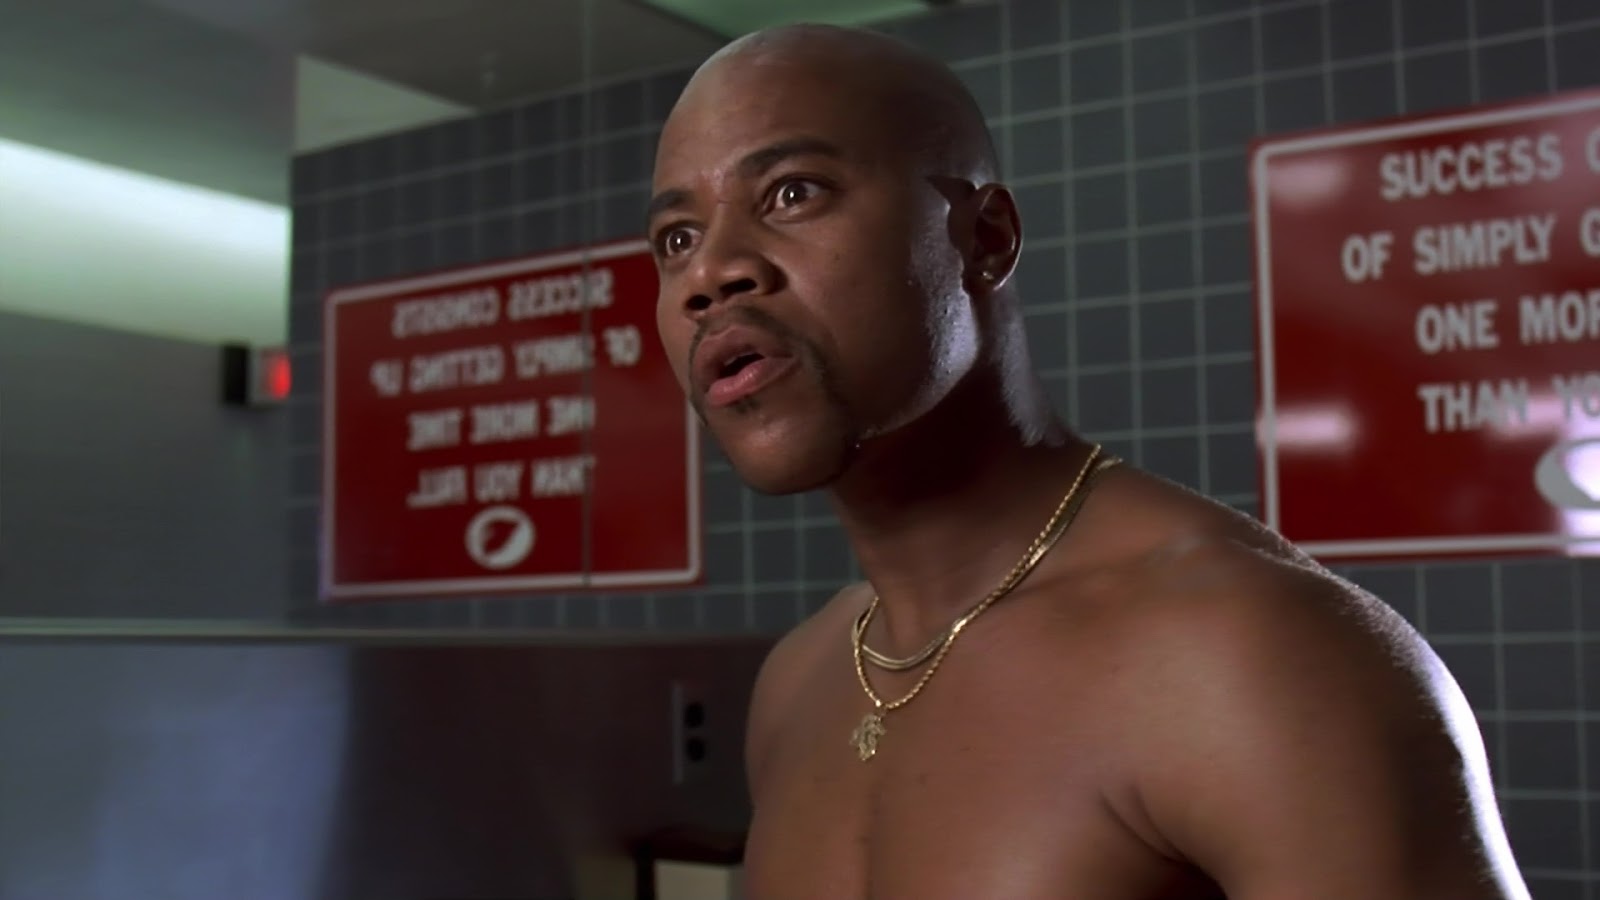 Cuba Gooding Jr. and Gale Hillman nude in Jerry Maguire.